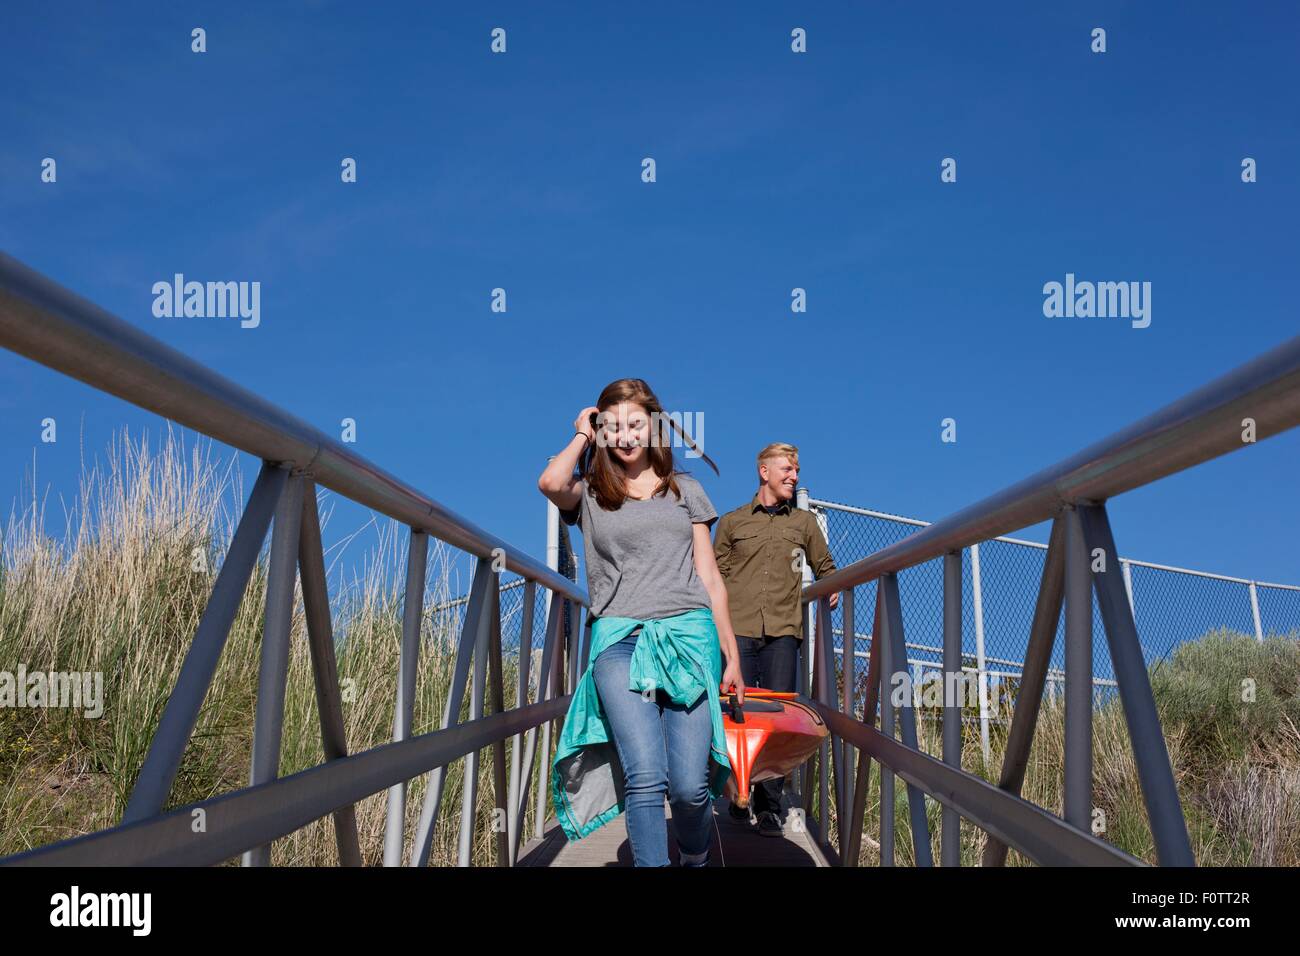 Front view of young couple carrying kayak on walkway with railings Stock Photo